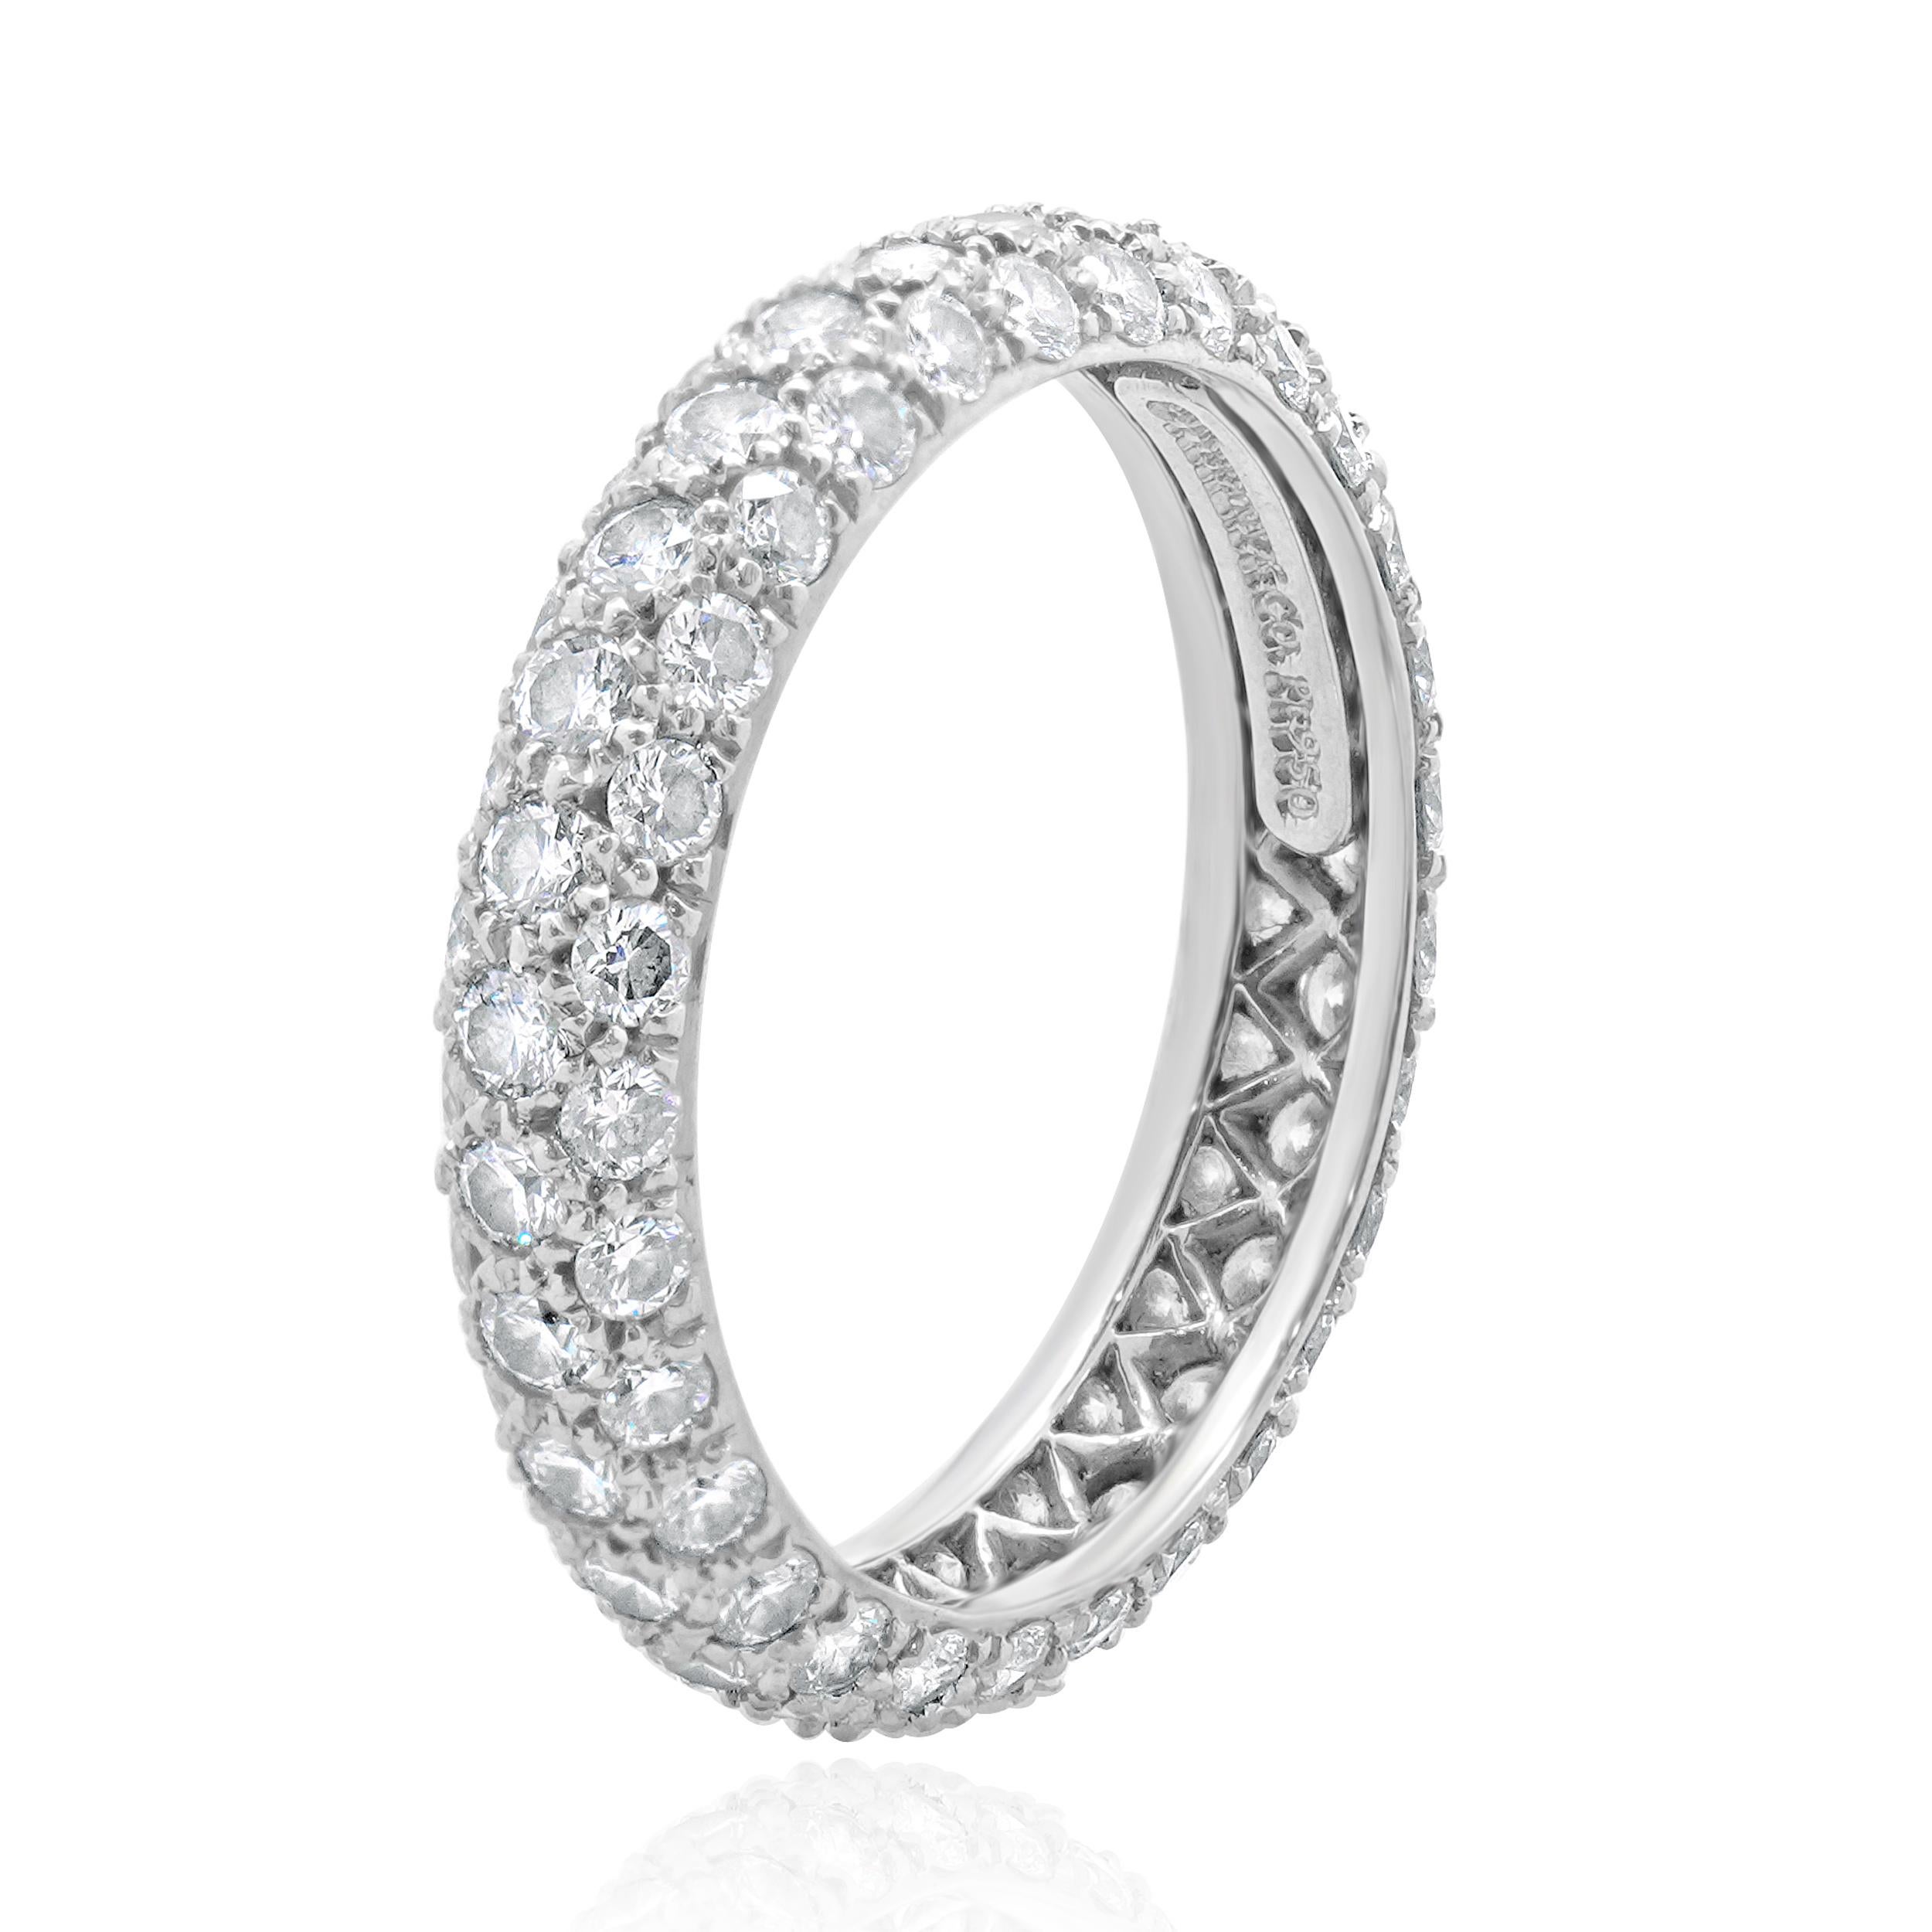 Designer: Tiffany & Co. 
Material: platinum
Diamond: 78 round brilliant cut = 1.51cttw
Color: G
Clarity: SI1
Dimensions: ring top measures 4mm
Size: 6.75
Weight: 3.51 grams
